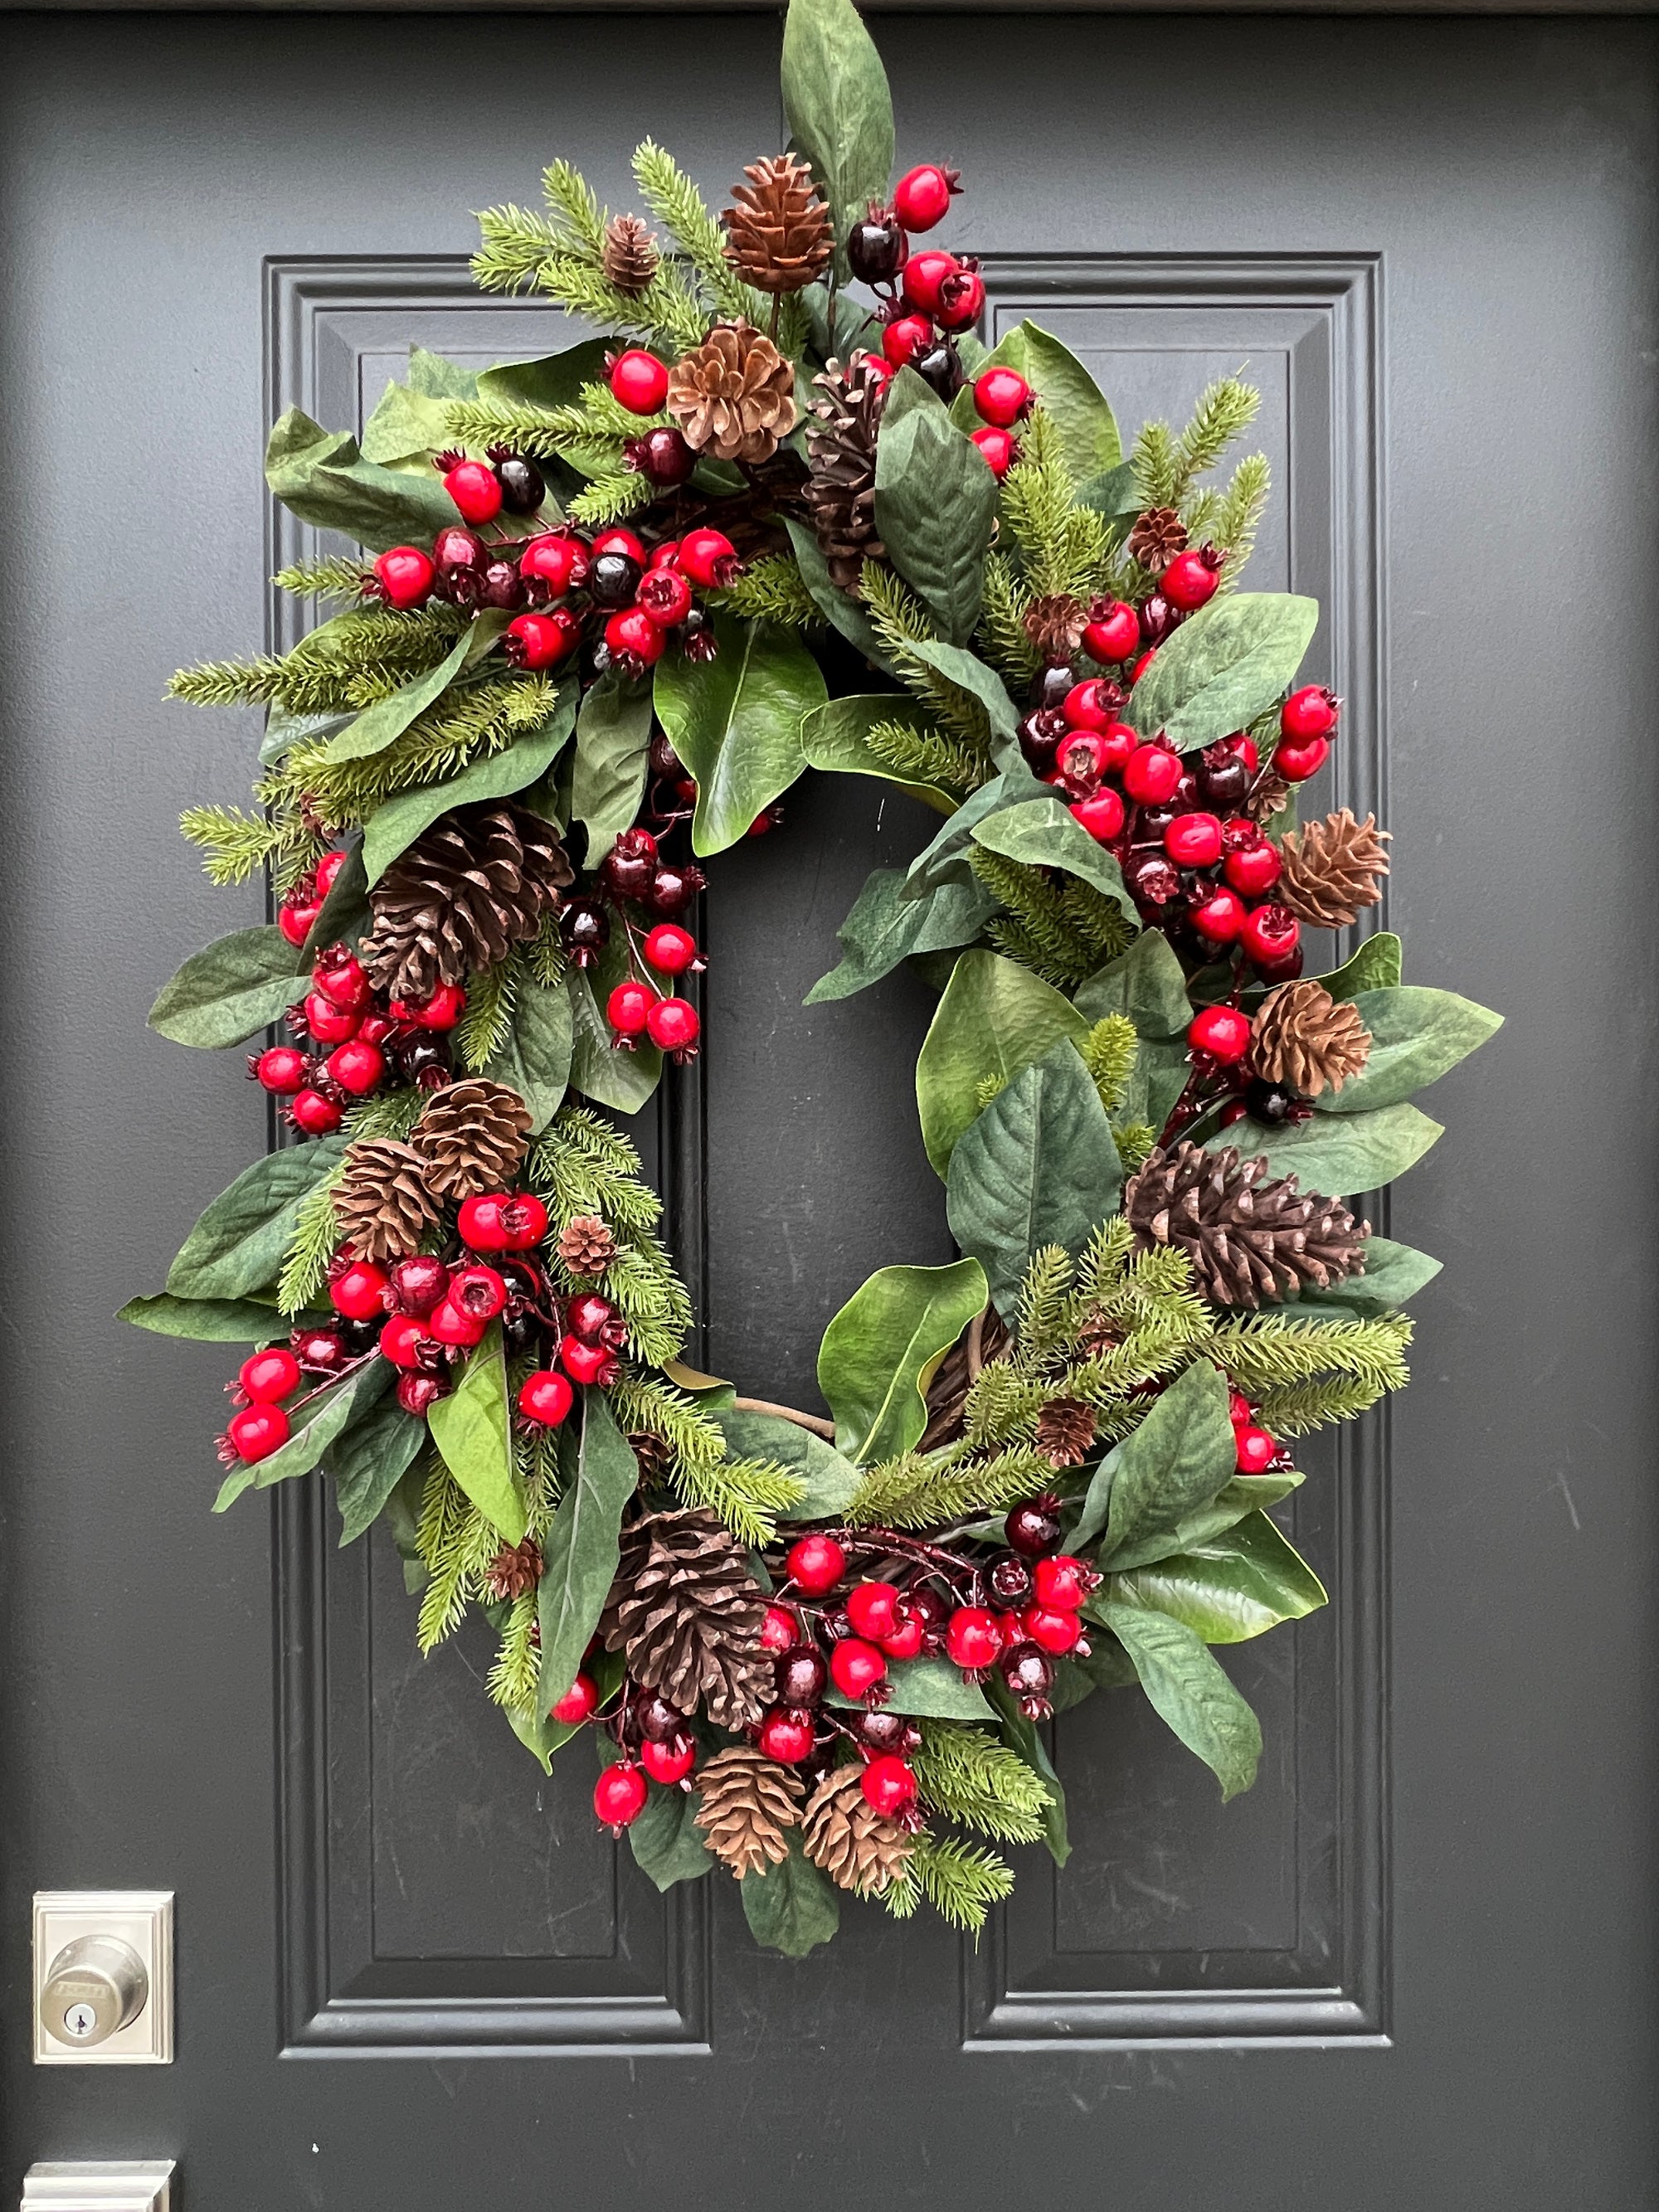 Oval Magnolia Wreath with Currant Berries and Pinecones